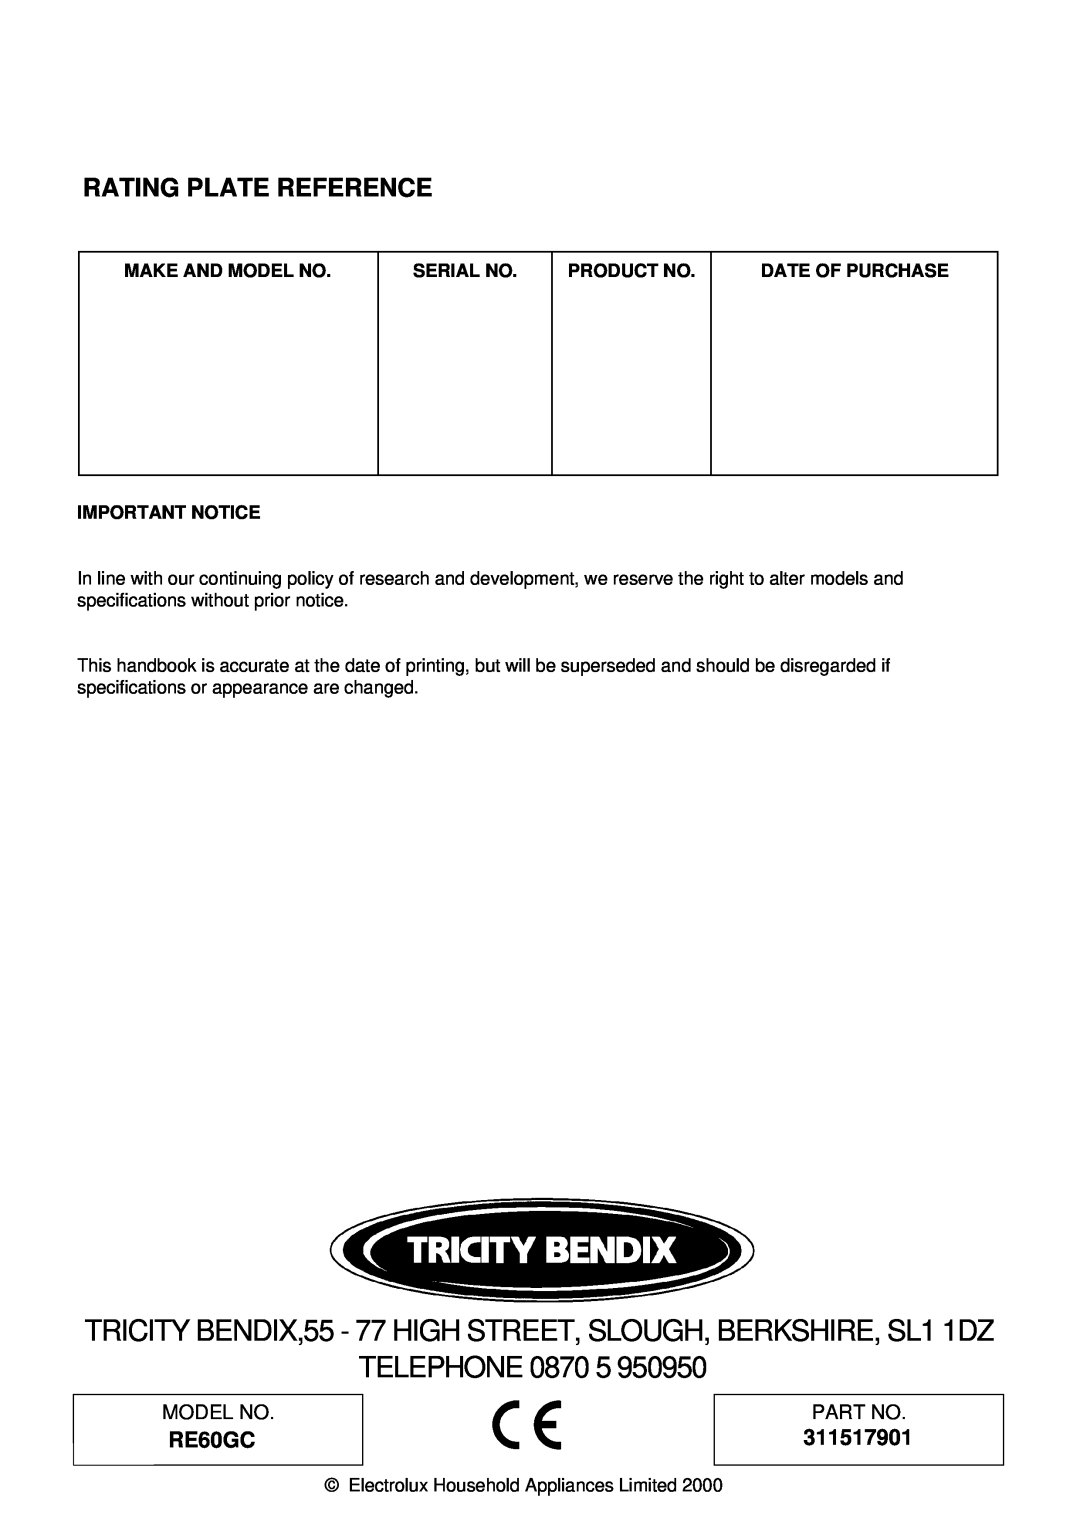 Tricity Bendix RE60GC Rating Plate Reference, 311517901, Telephone, Make And Model No, Serial No, Product No 